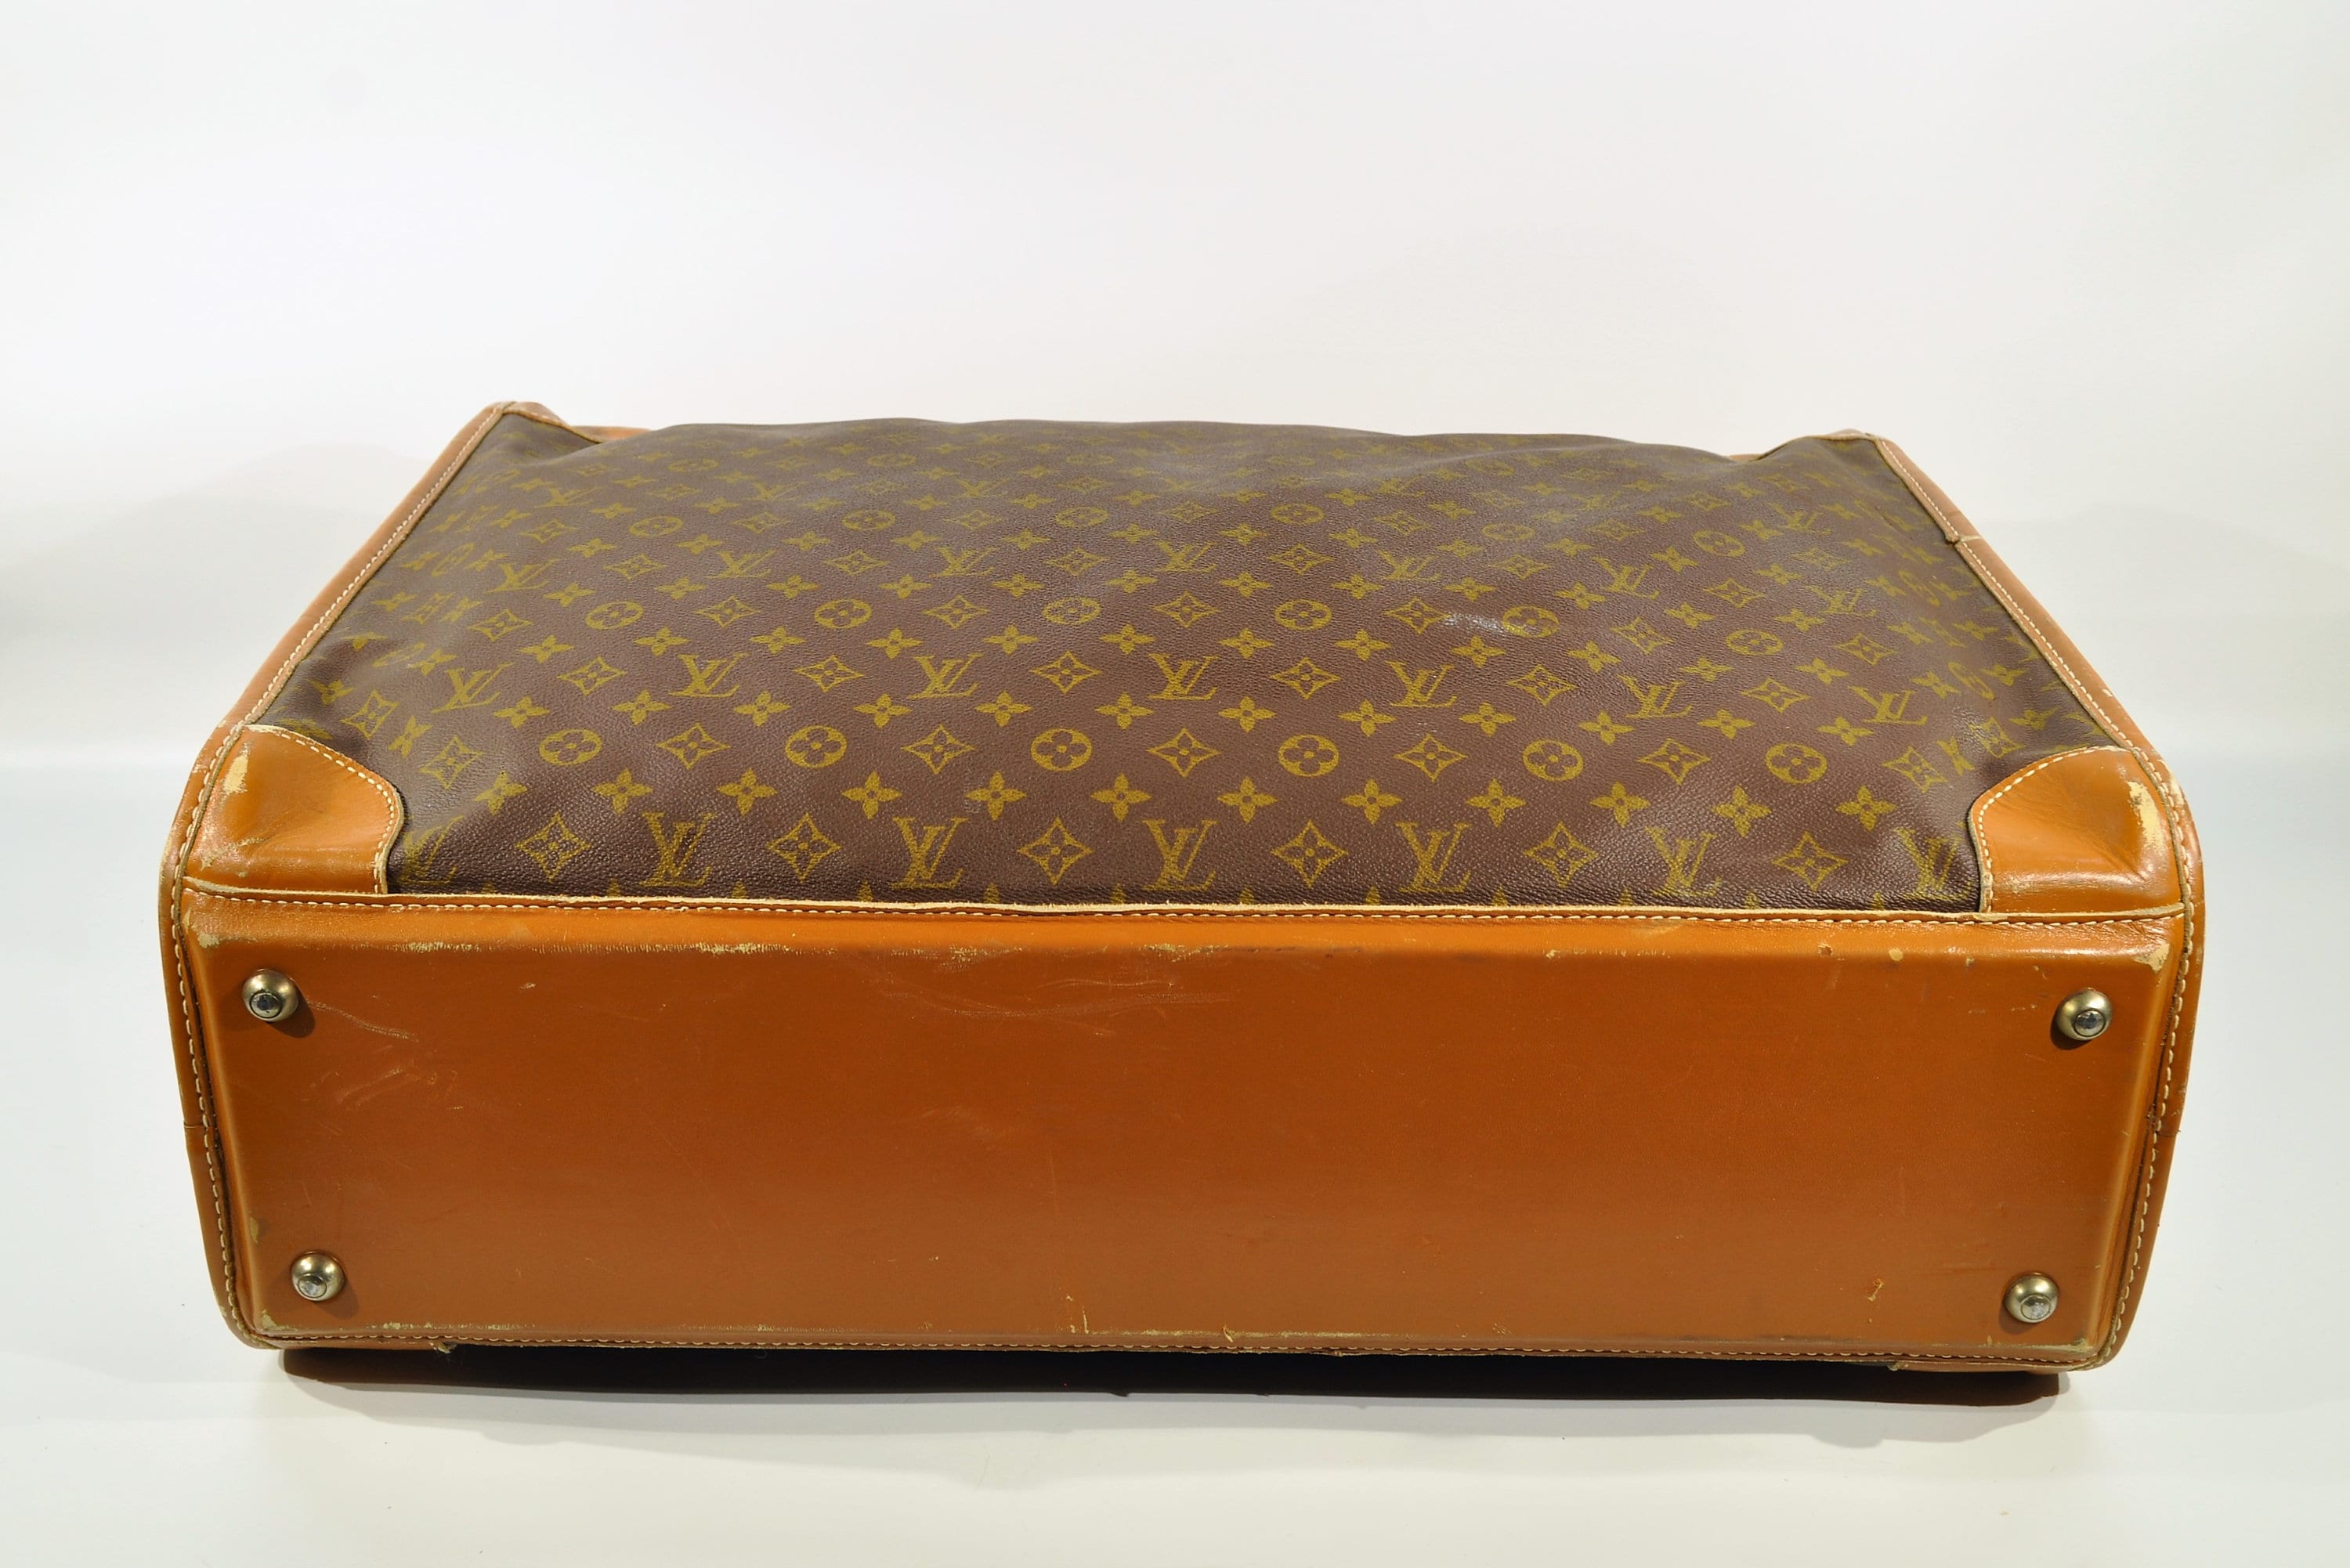 French Madame: Personalized Louis Vuitton Suitcases